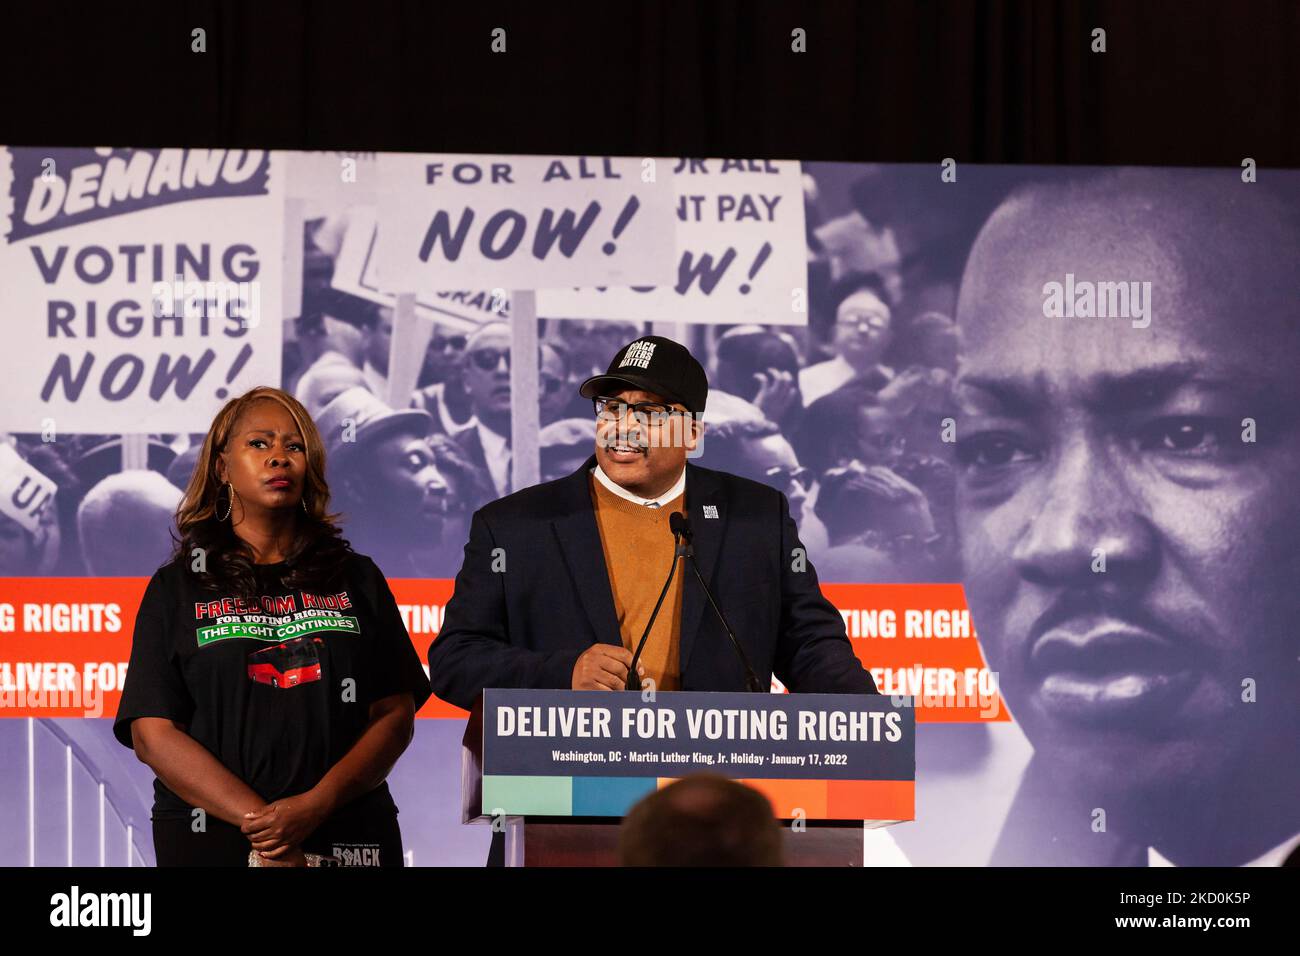 LaTosha Brown and Cliff Albright, co-founders of Black Voters Matter, speak during a press conference on voting rights hosted by the Deliver for Voting Rights coalition. The conference features the King family, civil rights leaders, members of Congress, and representatives of partner organizations. The King family asked Americans not to celebrate the birthday of MLK Jr. if the Senate had not yet passed legislation to protect voting rights, but to call their Senators to demand they pass voting rights guarantees. The Senate is expected to vote later in the week on the Freedom to Vote and John Le Stock Photo